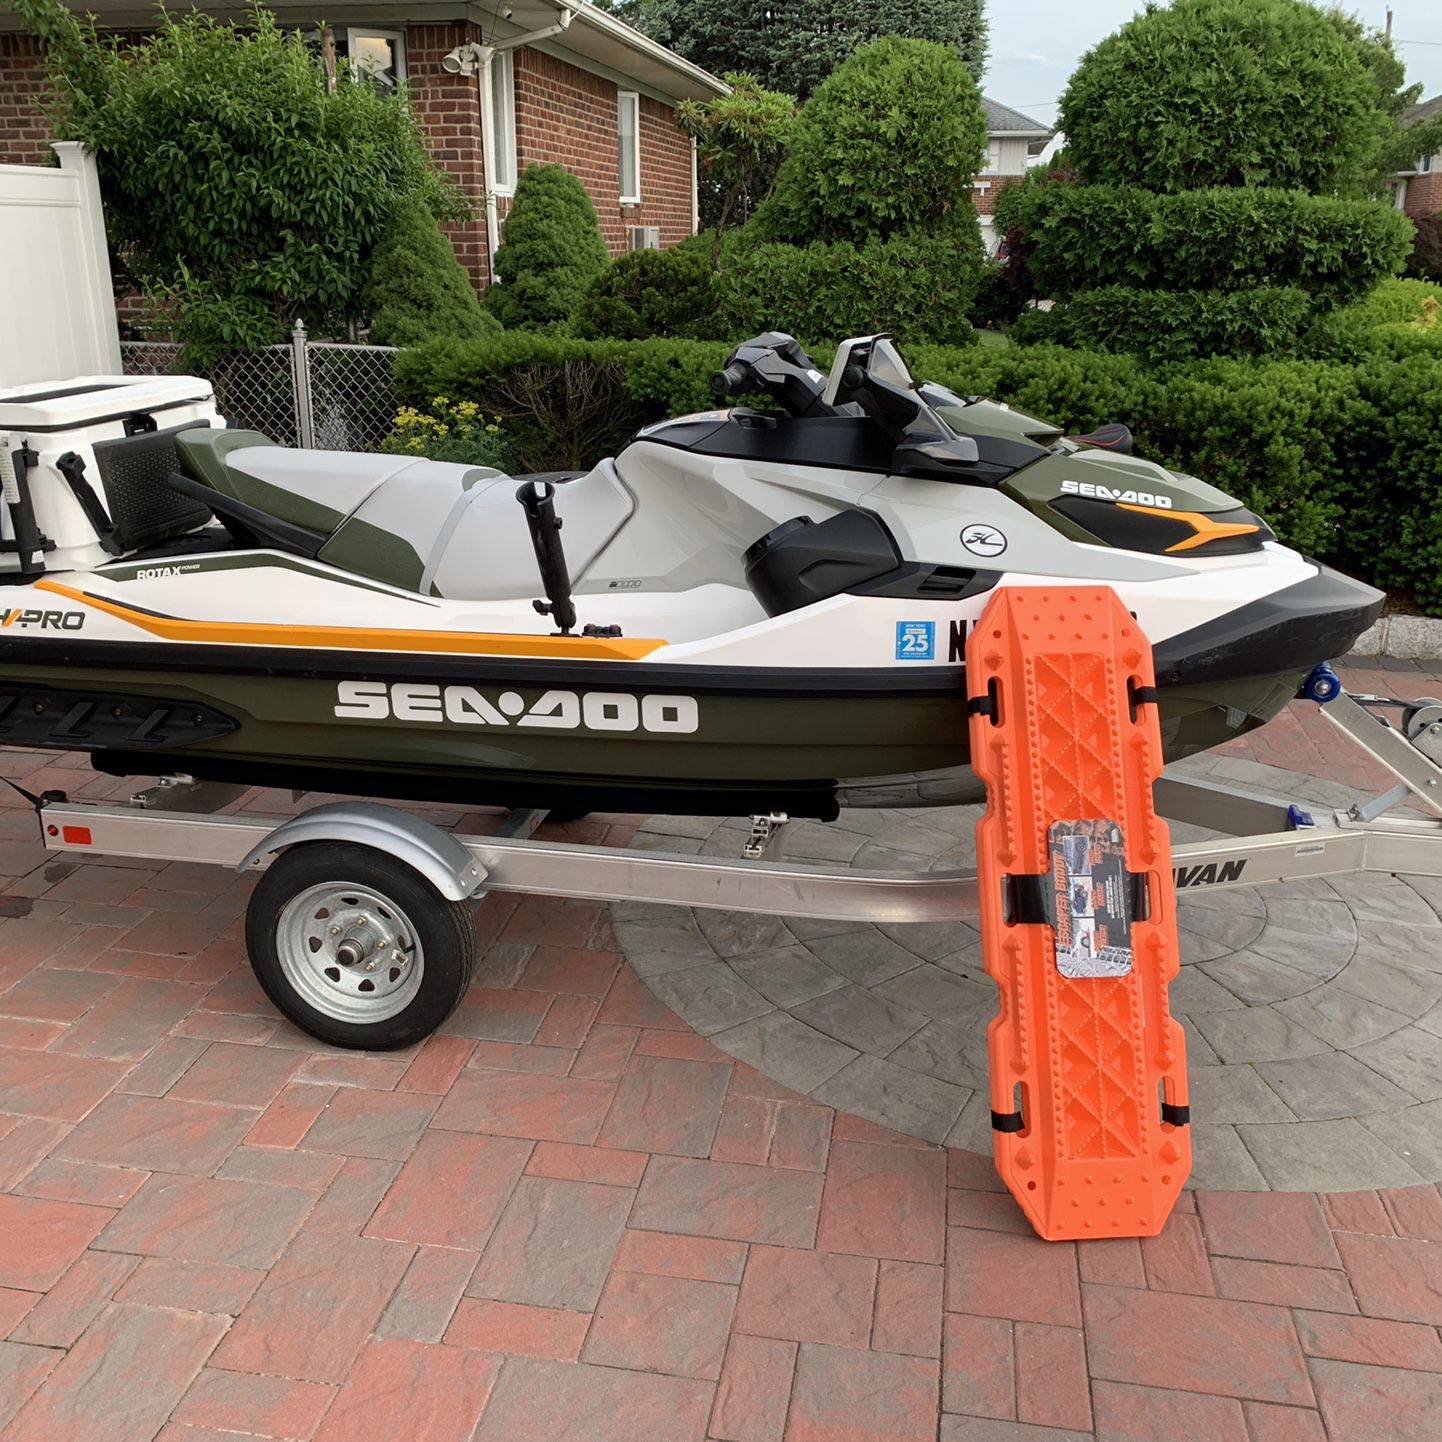 2019 Seadoo Fish Pro with Audio System for Sale in Bethpage, NY - OfferUp